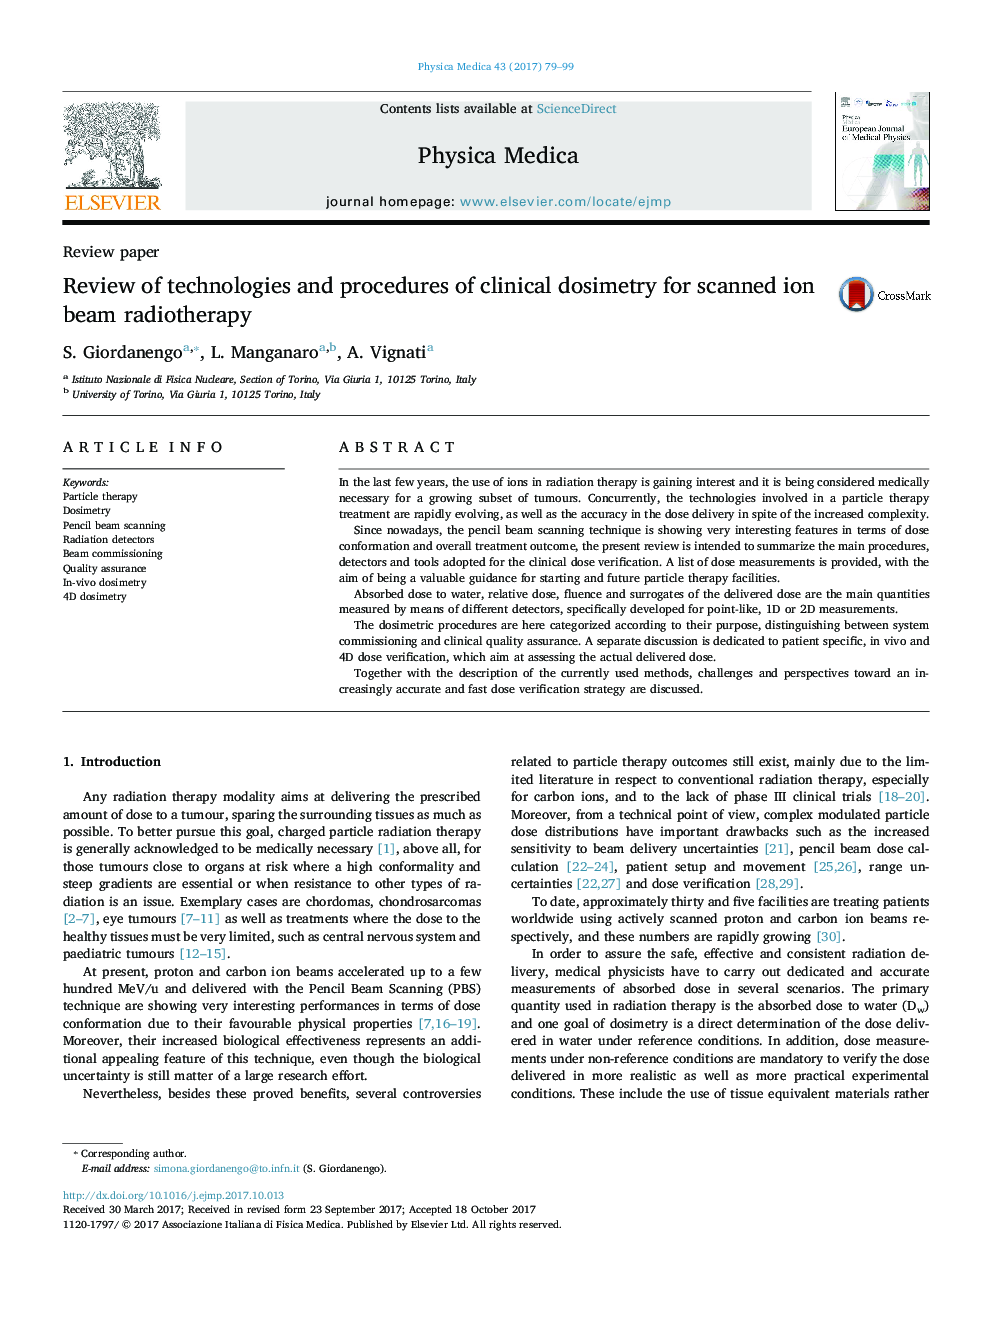 Review of technologies and procedures of clinical dosimetry for scanned ion beam radiotherapy